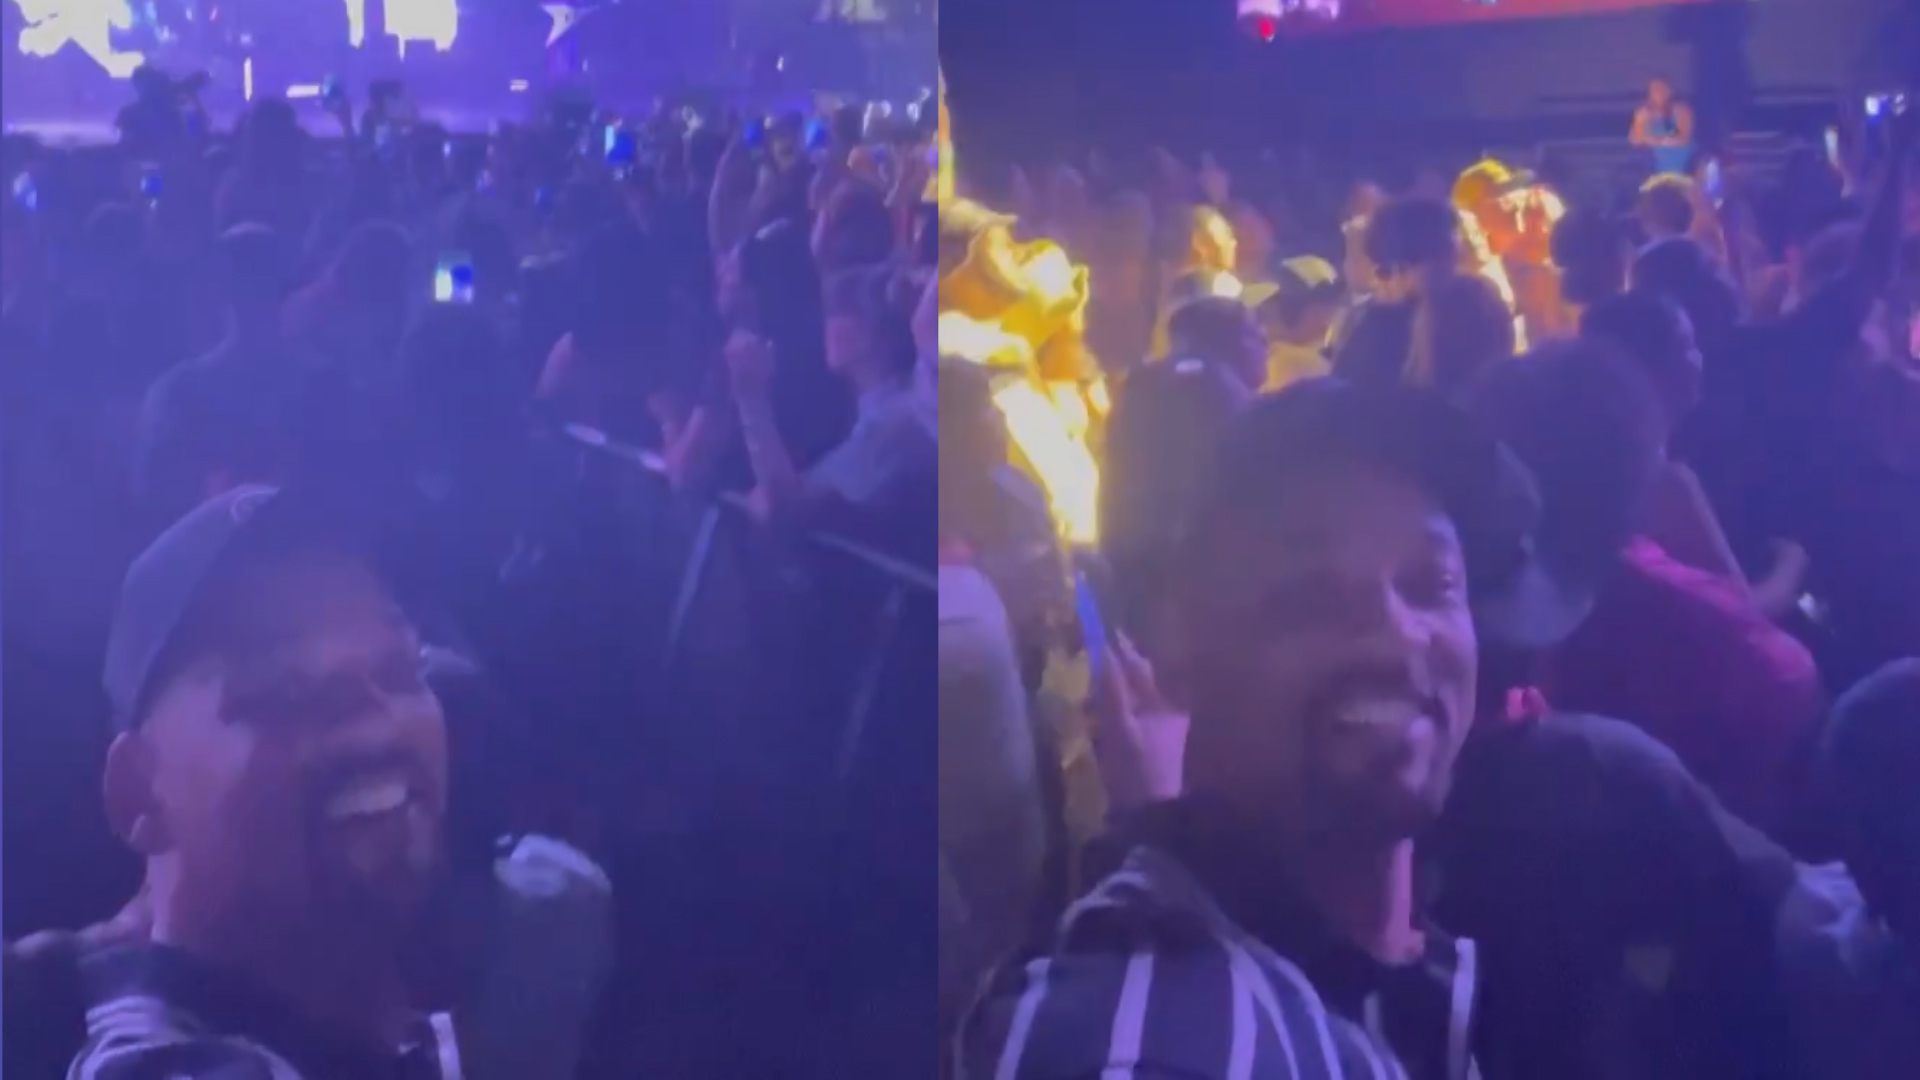 Will Smith is a proud dad at Coachella as he supports children Willow and Jaden from the crowd